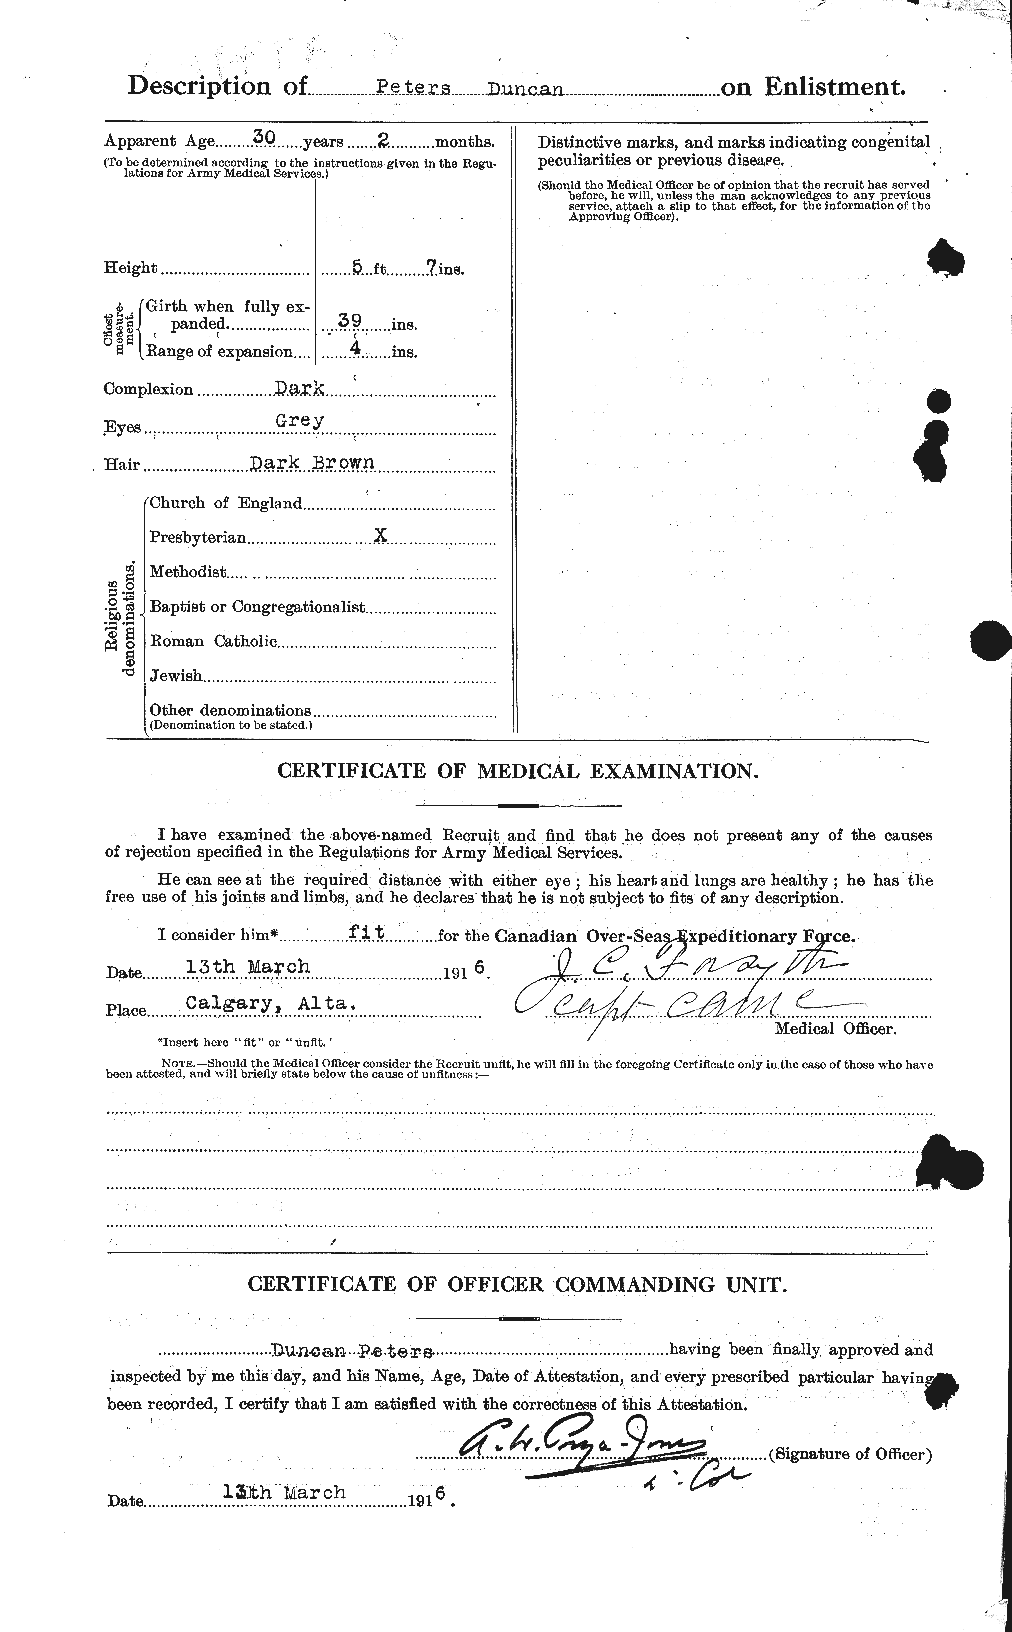 Personnel Records of the First World War - CEF 575398b